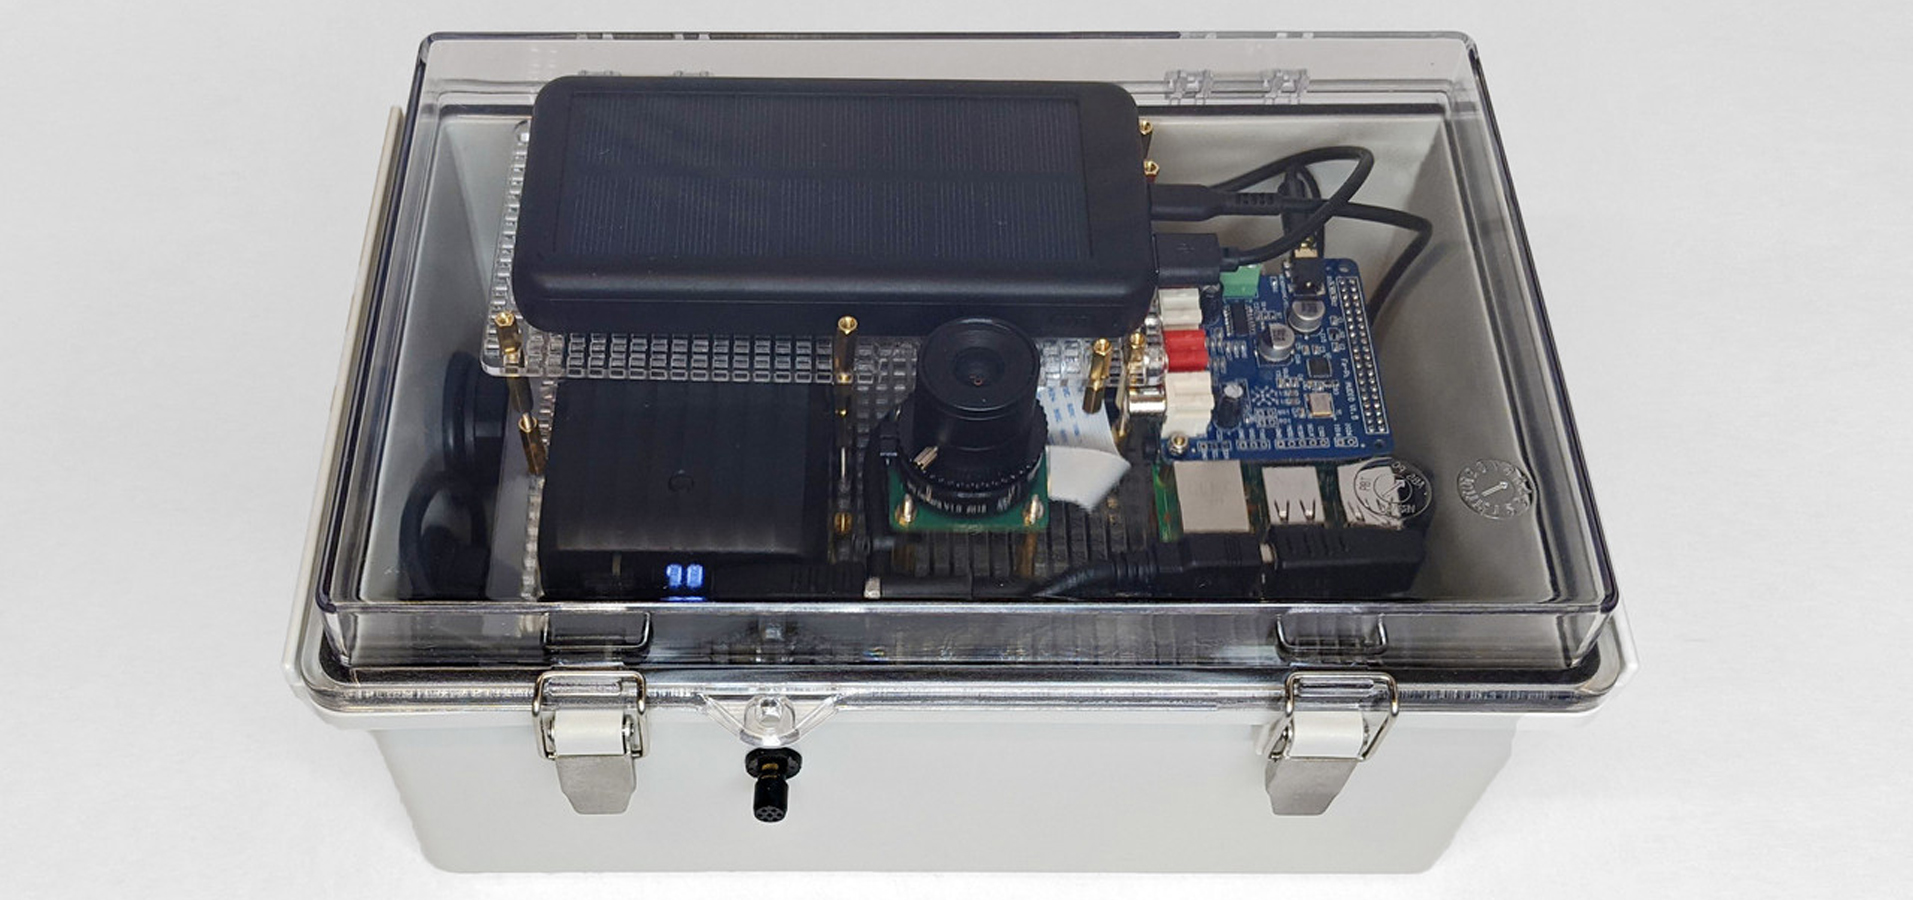 A clear plasic box containing electronics and a solar cell.